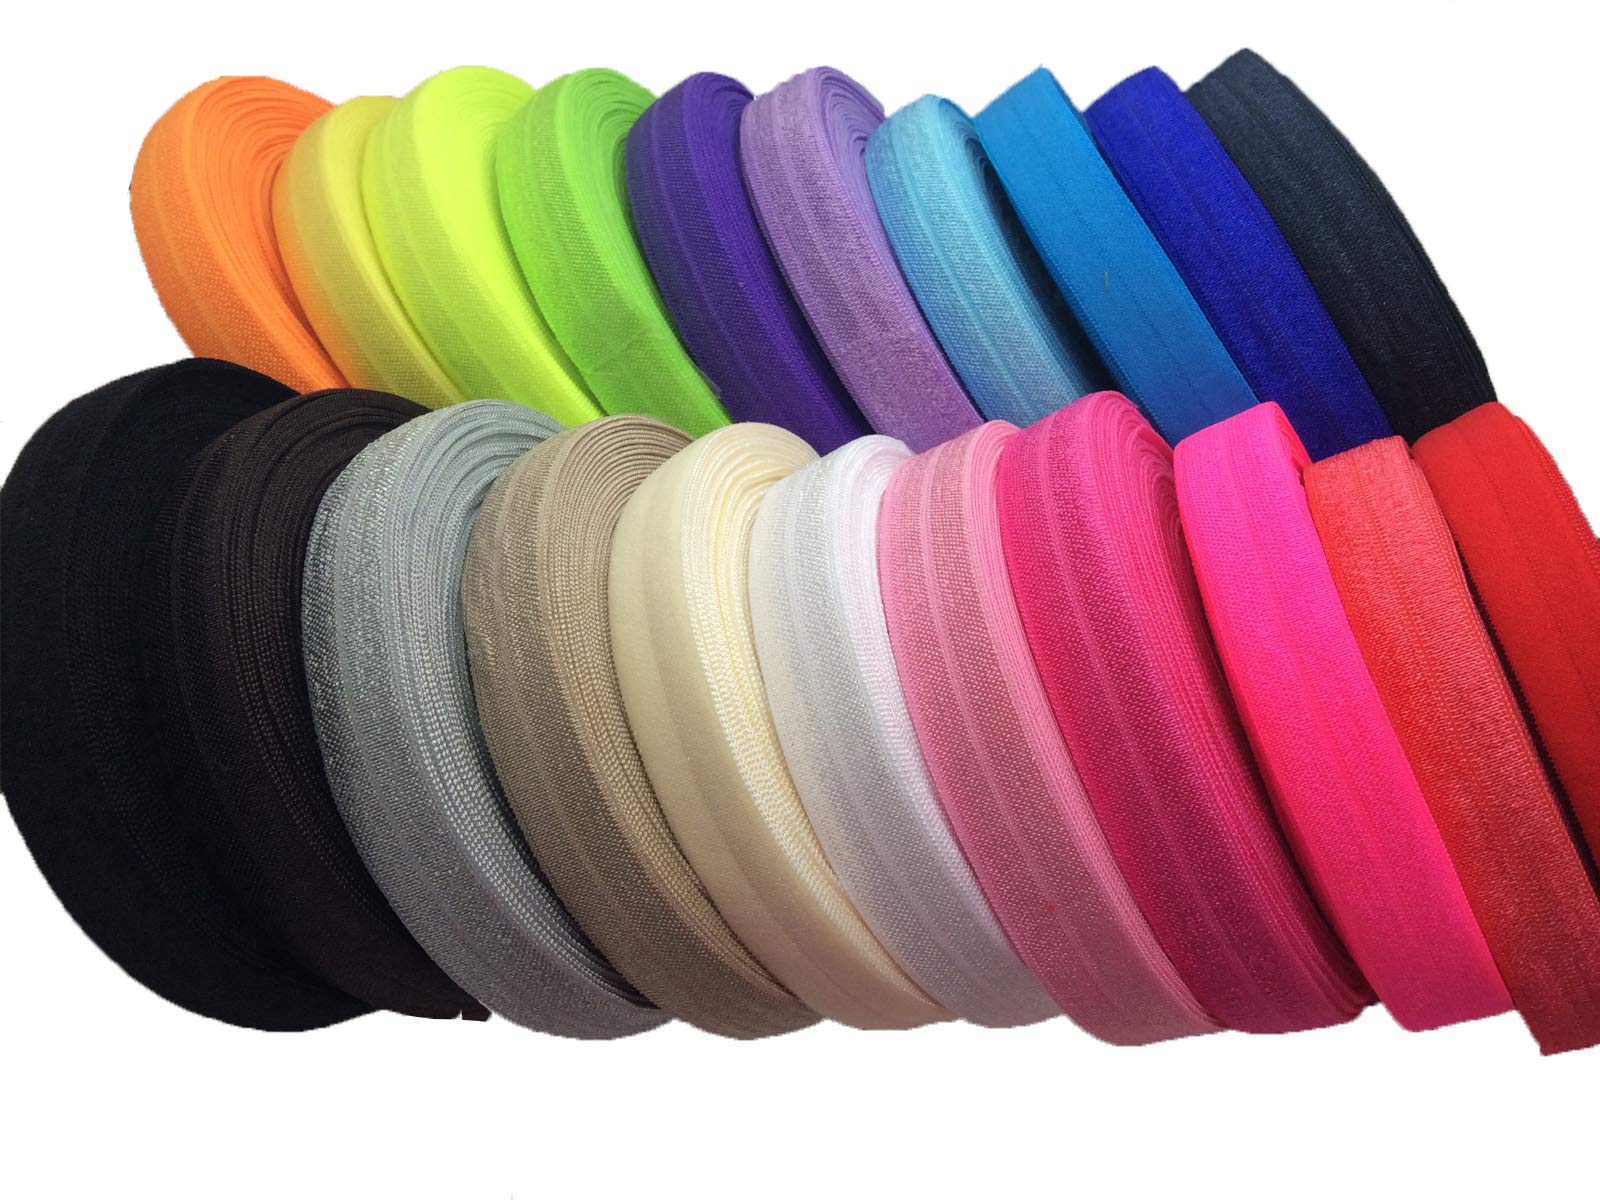 Looking for custom elastic? These customconvenience elastics are made with the latest softest and most comfortable fabrics available. In AliExpress, you can also find other good deals on item that you desired! With low prices, we don